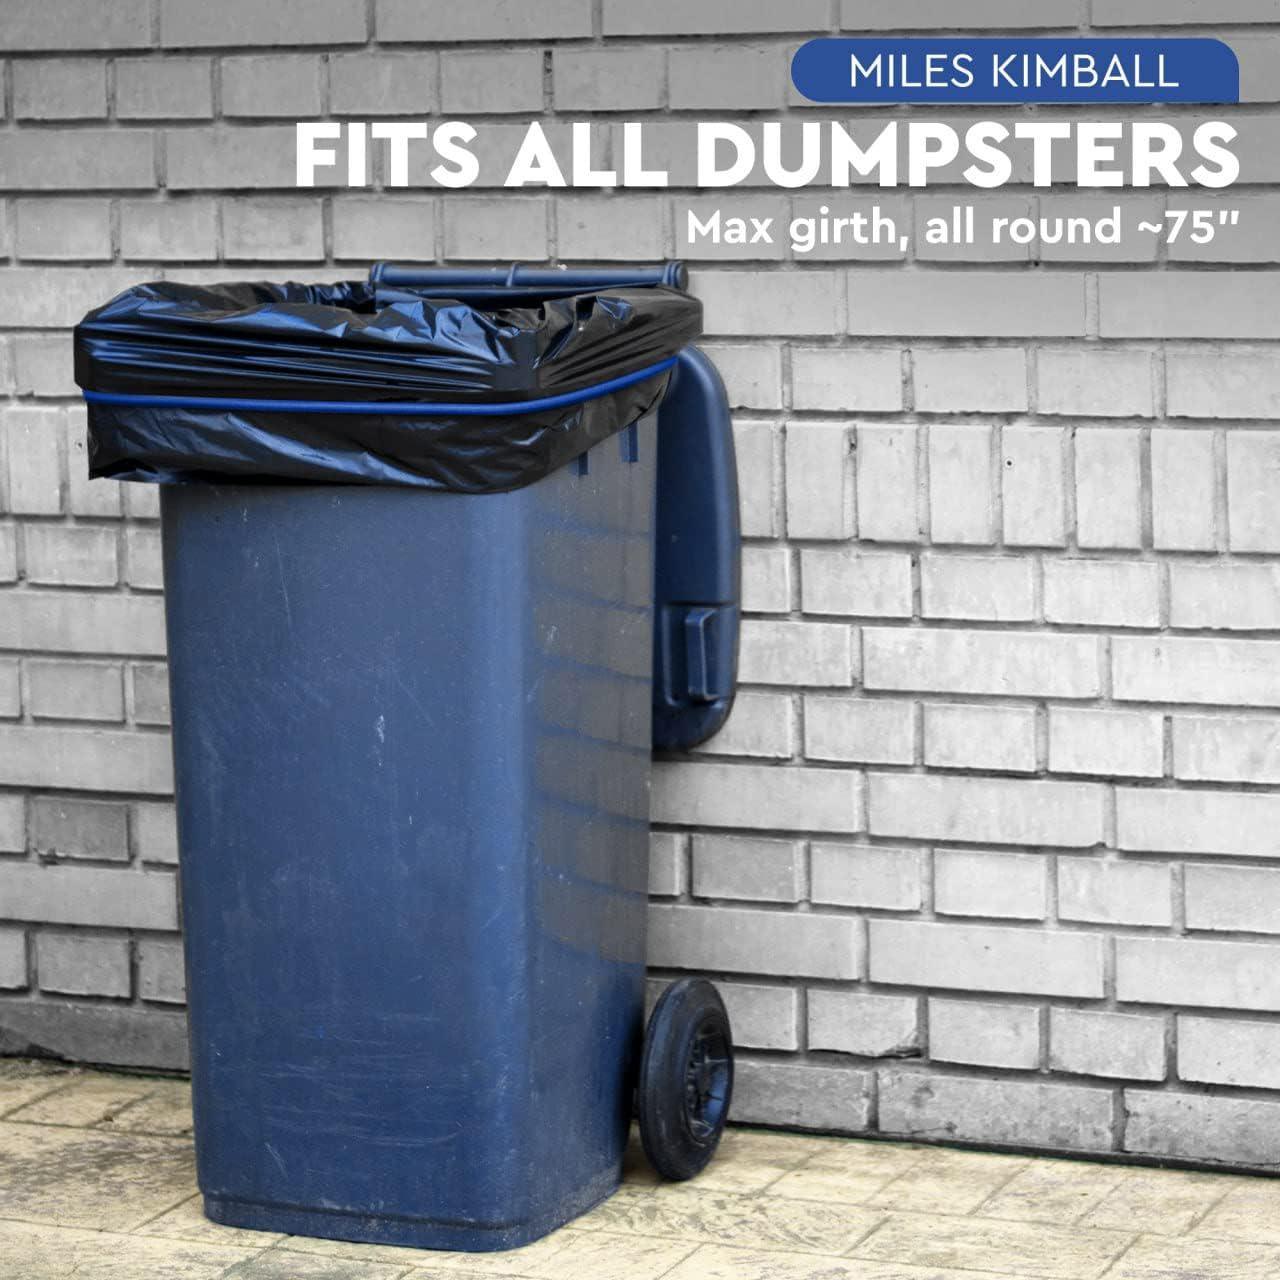 Miles Kimball Trash Can Bands Set of 3 Metal Connector Fits 13 to 33 Gallon Trash Bag Durable Elastic Garbage Bag Band for Indoor Outdoor Waste Basket Rubber Bands For Round & Square Bins Blue - Loomini